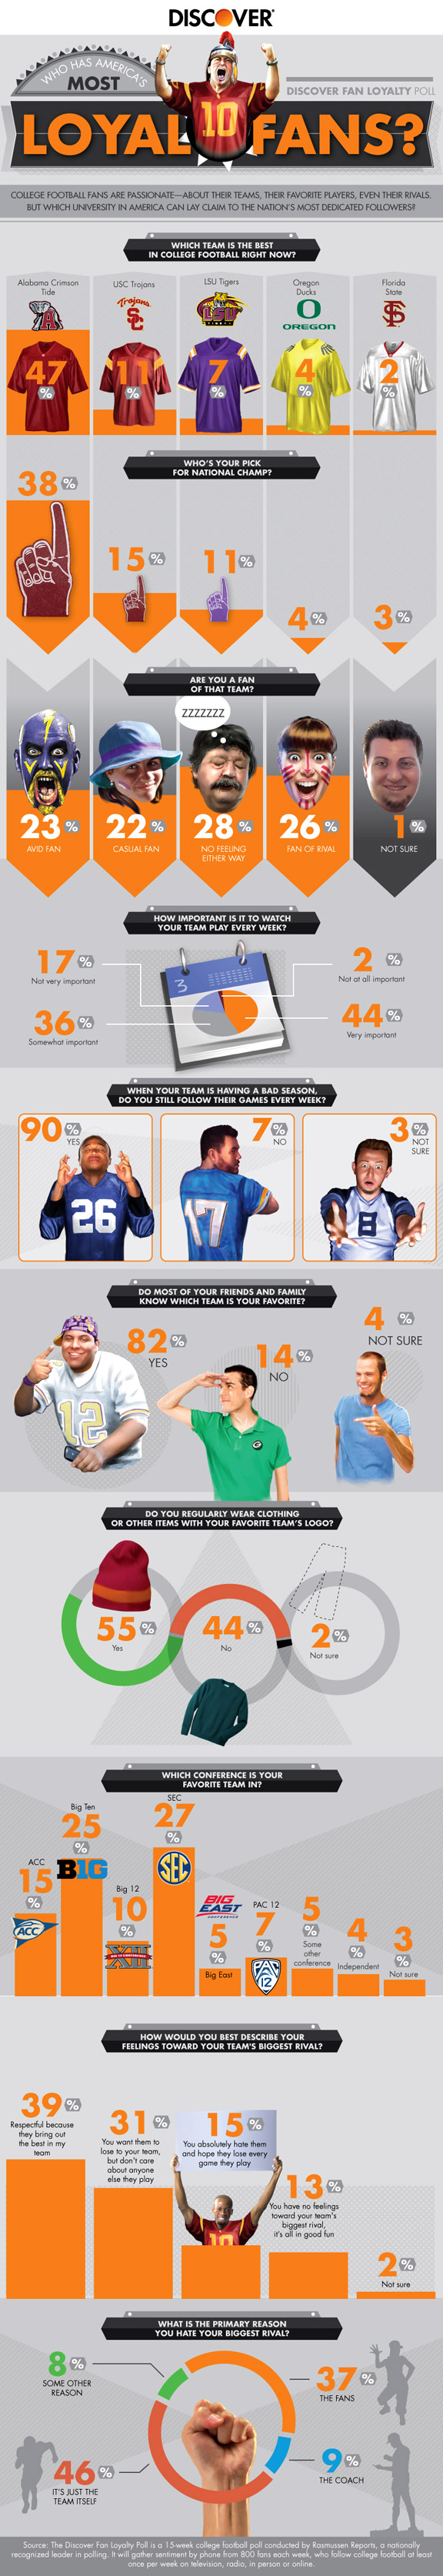 Discover fan loyalty infographic